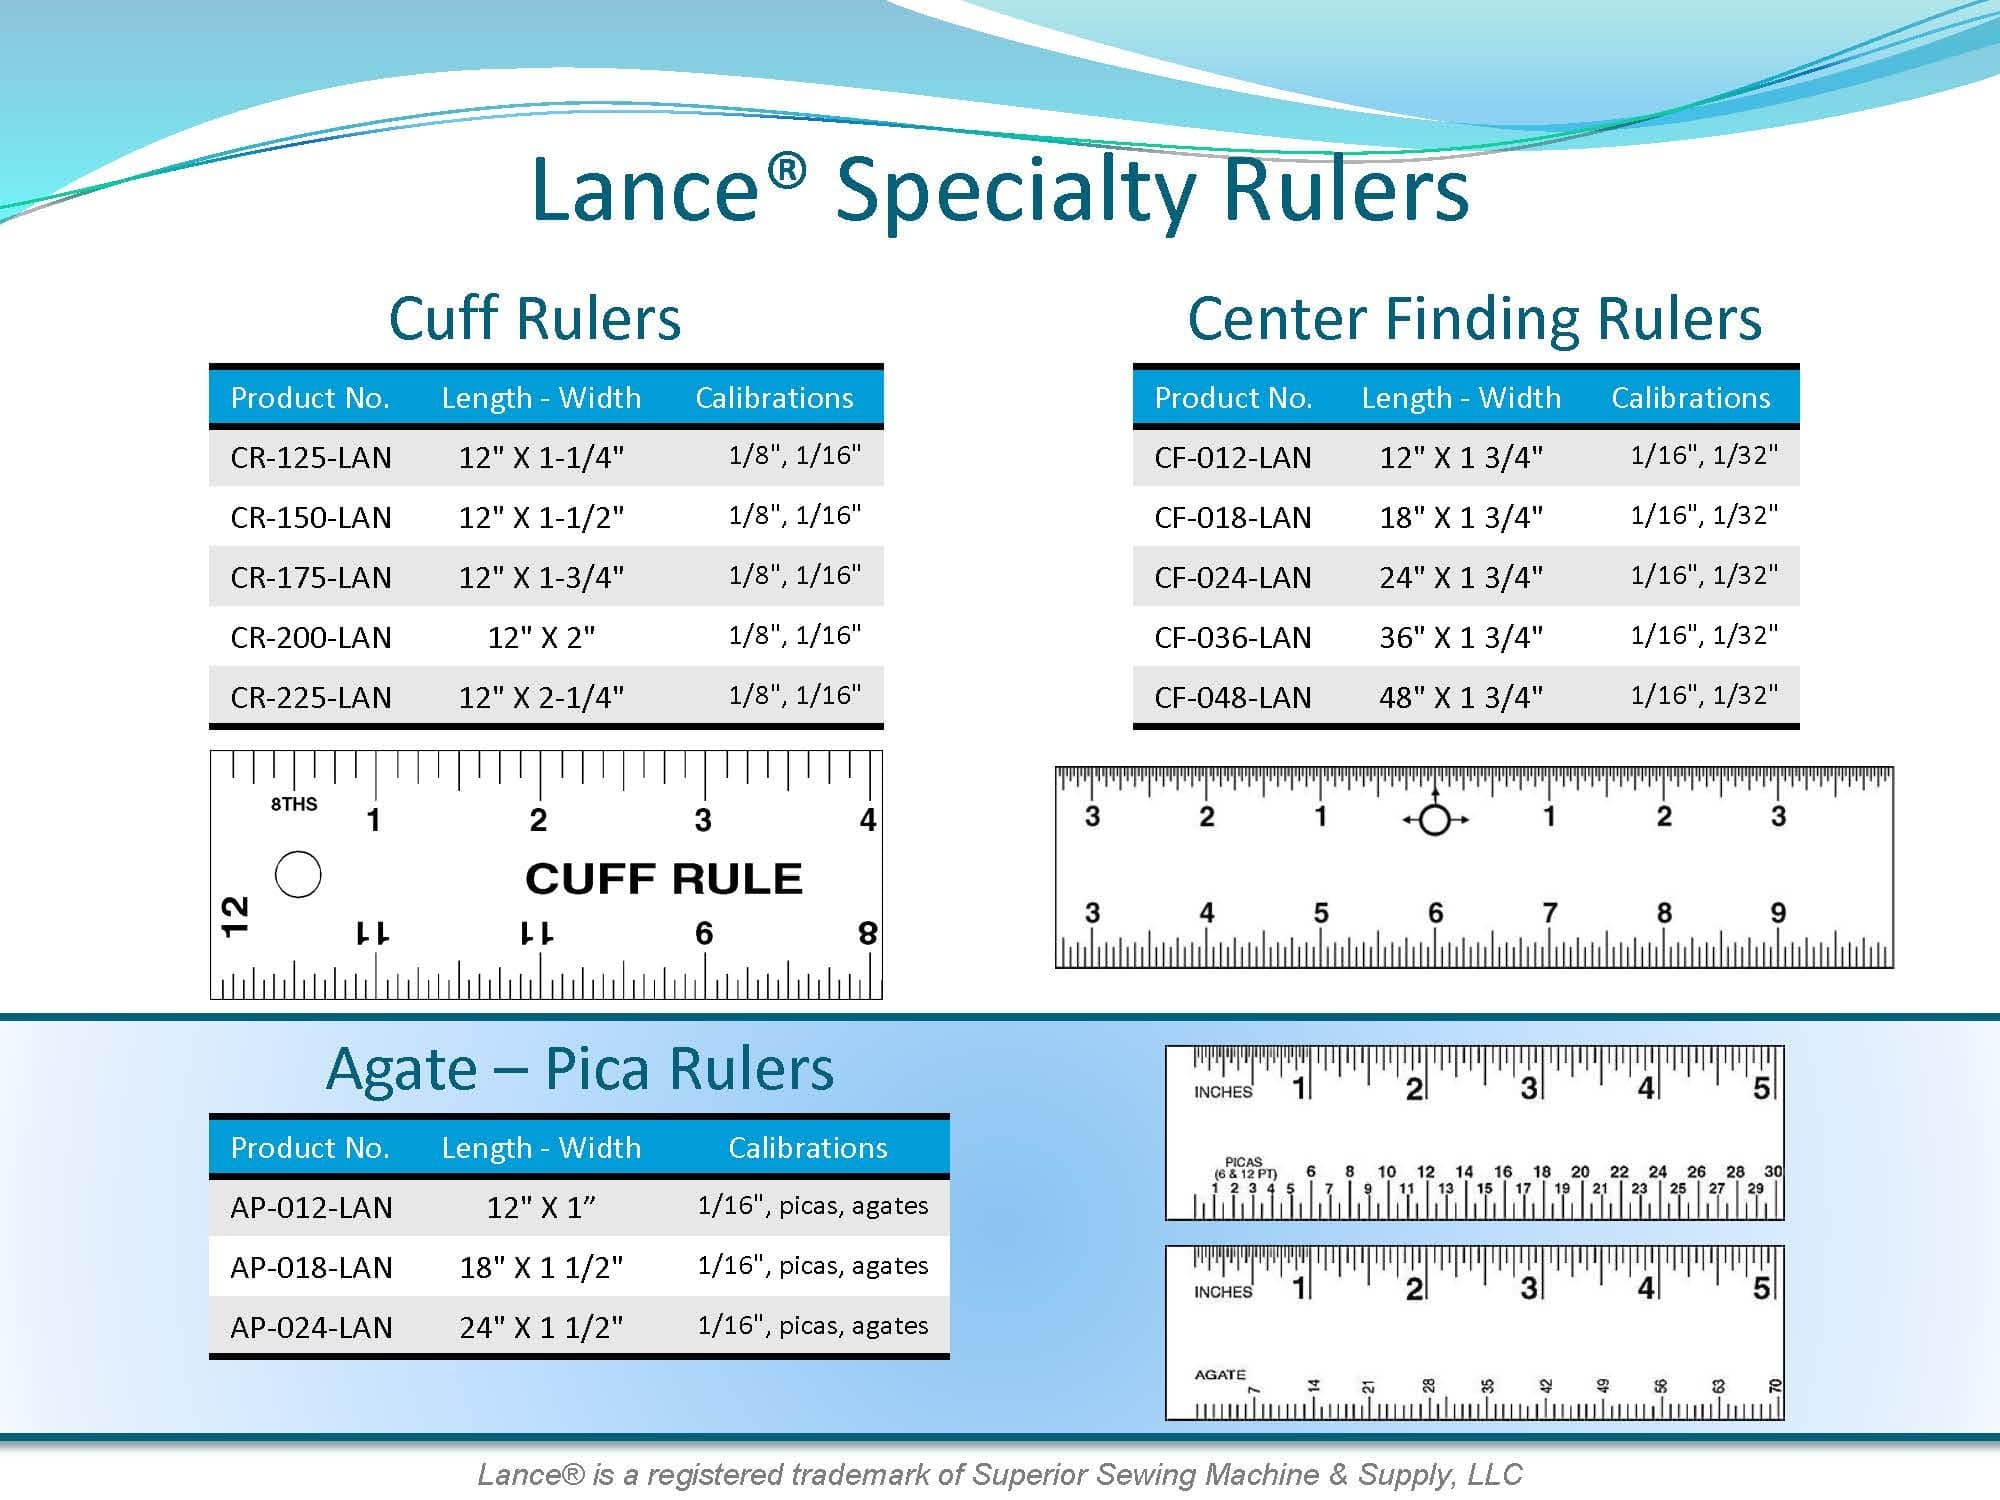 LANCE BLACK SPECIALTY RULERS
CUFF RULERS
CENTER FINDING RULERS
AGATE - PICA RULERS